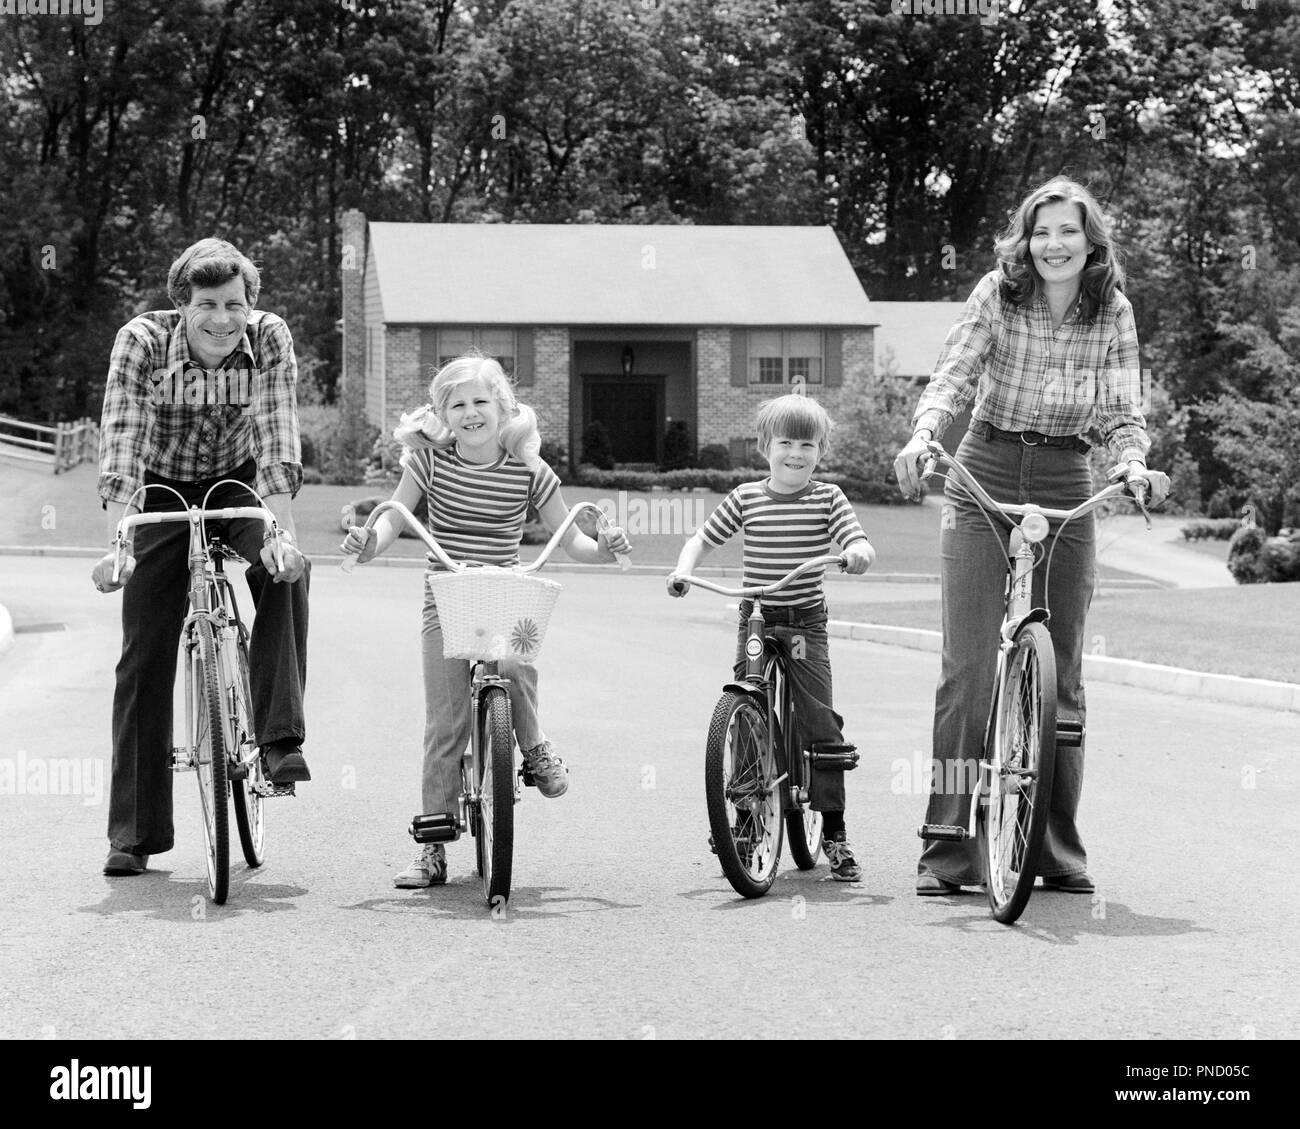 1970s SUBURBAN FAMILY OF FOUR SITTING ON BICYCLES LOOKING AT CAMERA - b25779 HAR001 HARS NOSTALGIC ACTIVE 4 SUBURBAN MOTHERS OLD TIME NOSTALGIA BROTHER OLD FASHION SISTER FITNESS JUVENILE STYLE HEALTHY TEAMWORK SONS PLEASED FAMILIES JOY LIFESTYLE FEMALES STRIPED MARRIED BROTHERS BIKING SPOUSE HUSBANDS HEALTHINESS HOME LIFE FULL-LENGTH PHYSICAL FITNESS DAUGHTERS MALES PLAID SIBLINGS CONFIDENCE BICYCLES SISTERS TRANSPORTATION FATHERS B&W BIKES EYE CONTACT FREEDOM WIDE ANGLE ACTIVITY HAPPINESS PHYSICAL WELLNESS CHEERFUL LEISURE STRENGTH DADS PRIDE OF ON SIBLING SMILES CONNECTION FLEXIBILITY Stock Photo